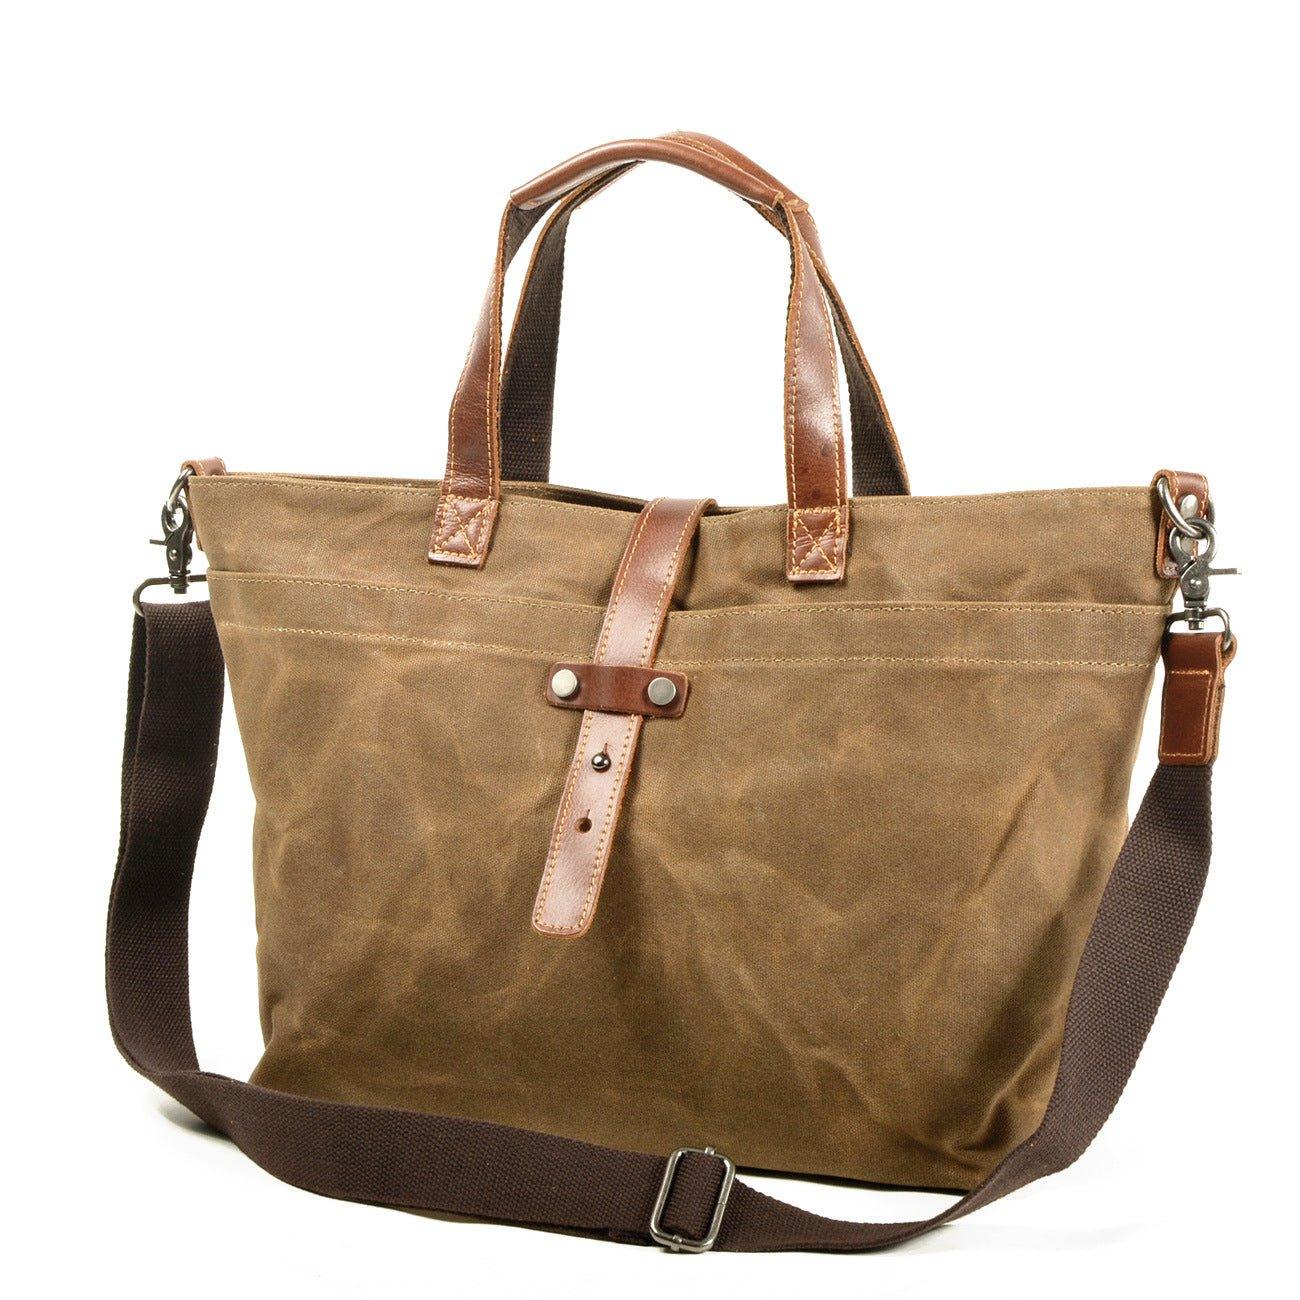 Woosir Waxed Canvas Tote Bag with Shoulder Strap